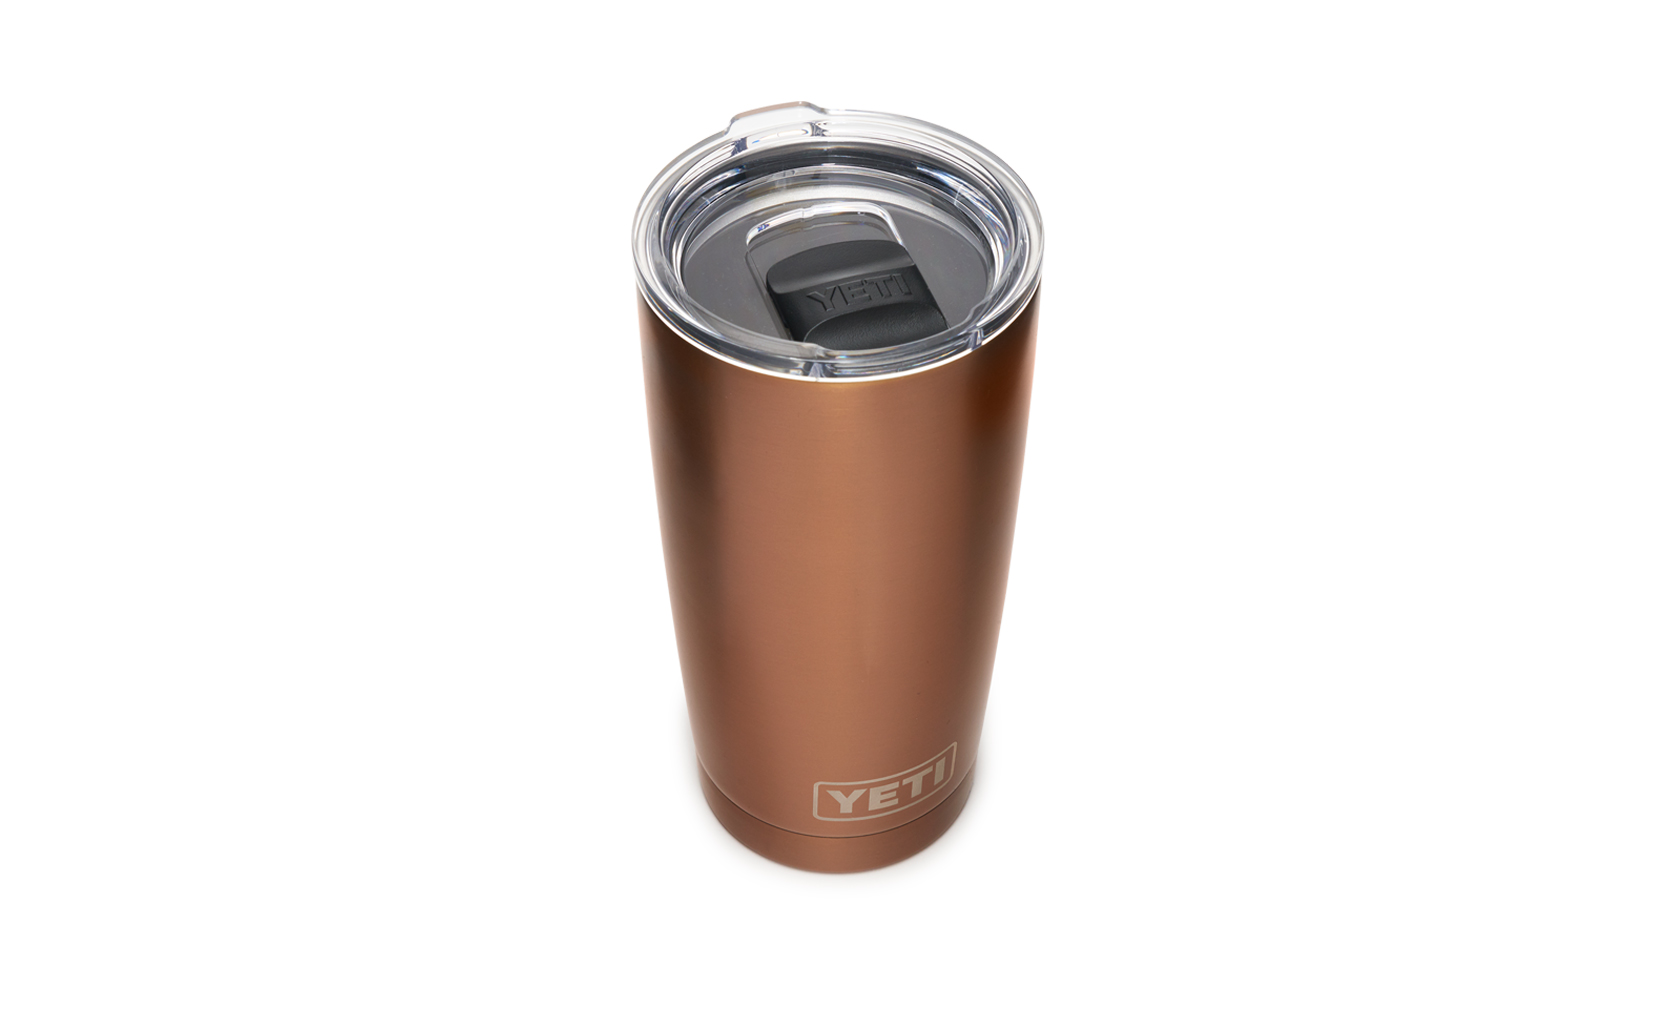 YETI Rambler 8oz Stackable Cup-Chartreuse